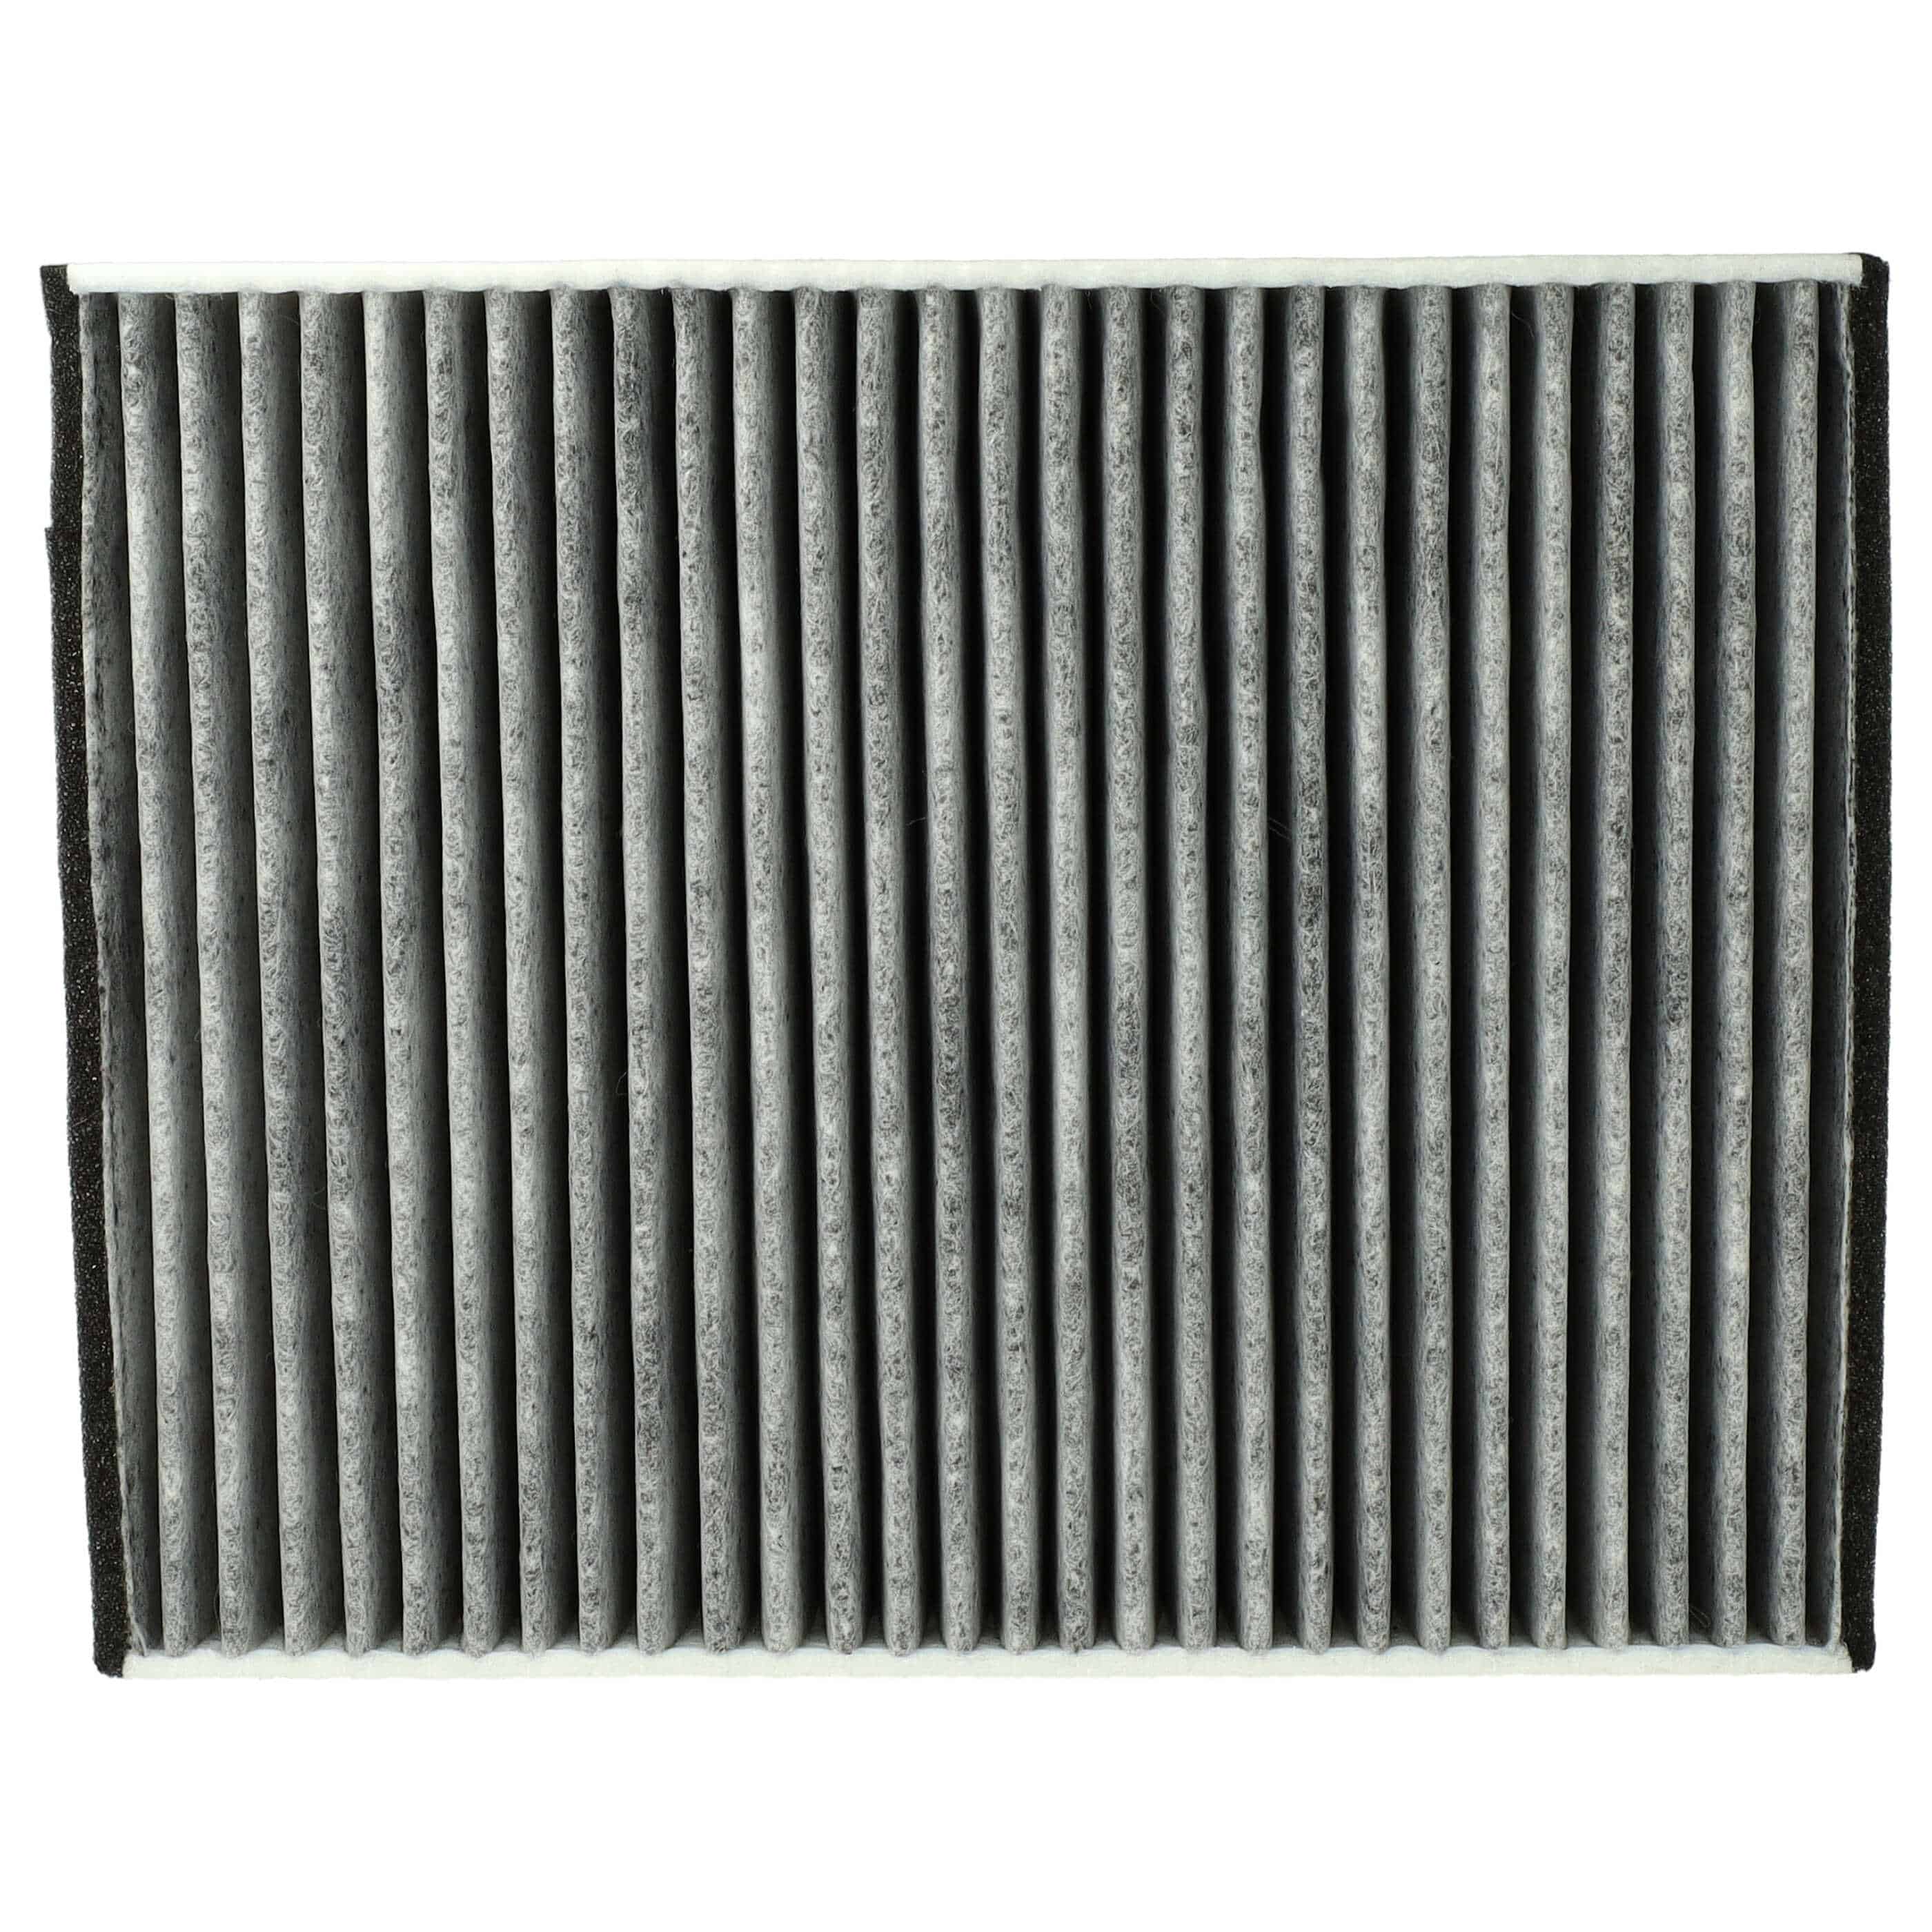 Filtre à air d'habitacle remplace Ford 2504776, AV6N19G244AA, AV6N19G244AAHF, 1709013, 1776360 pour voiture 